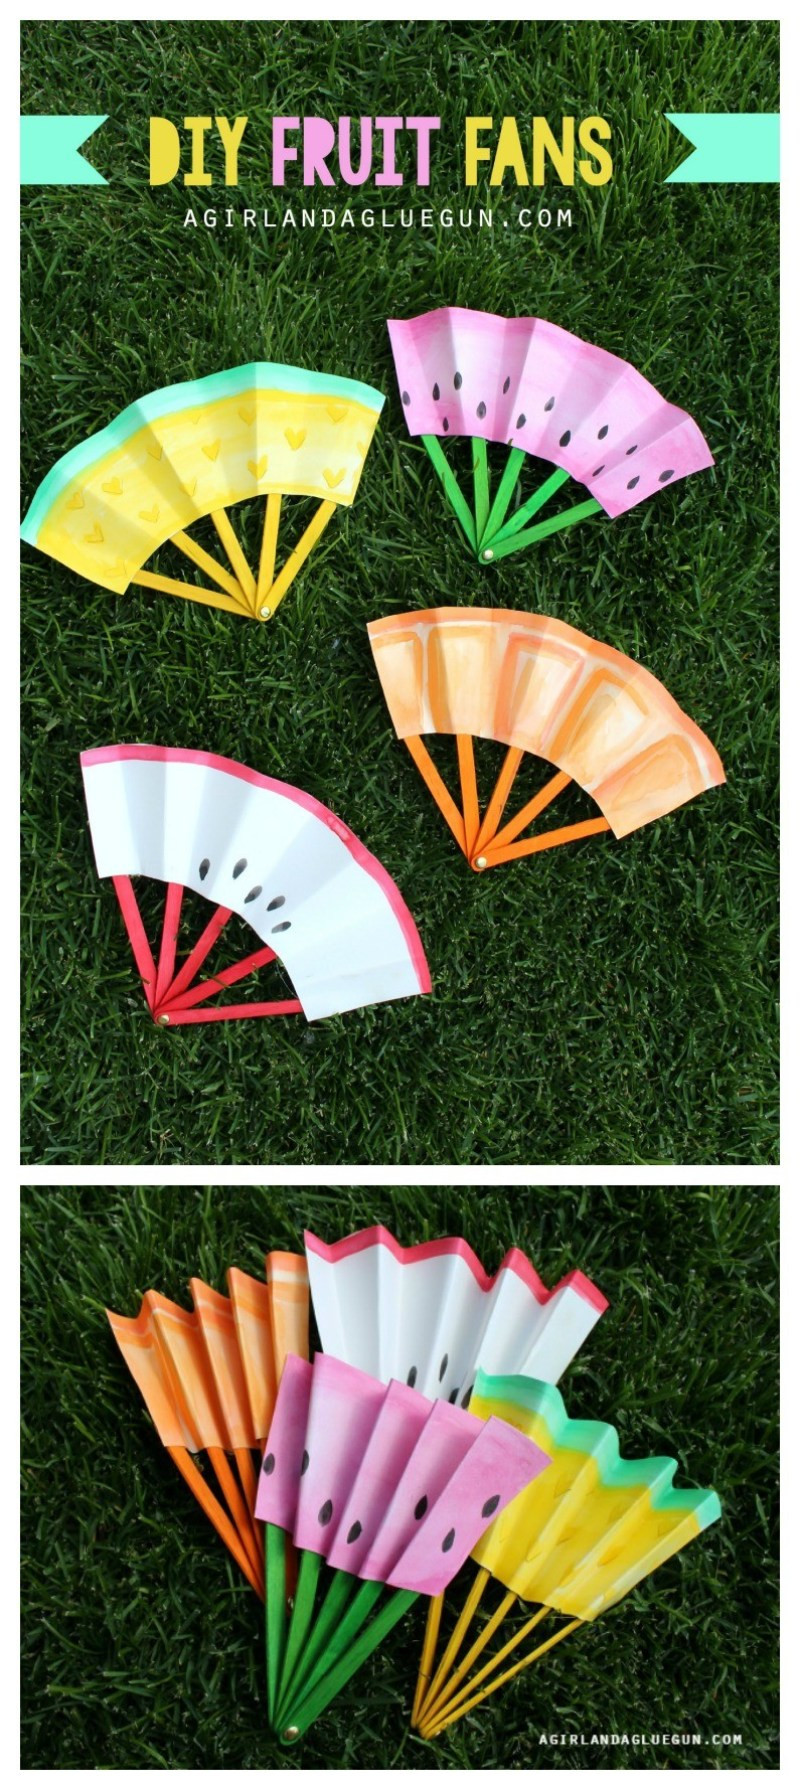 Fun DIY Crafts For Kids
 12 Favorite Easy Summer Crafts for Kids on Love the Day